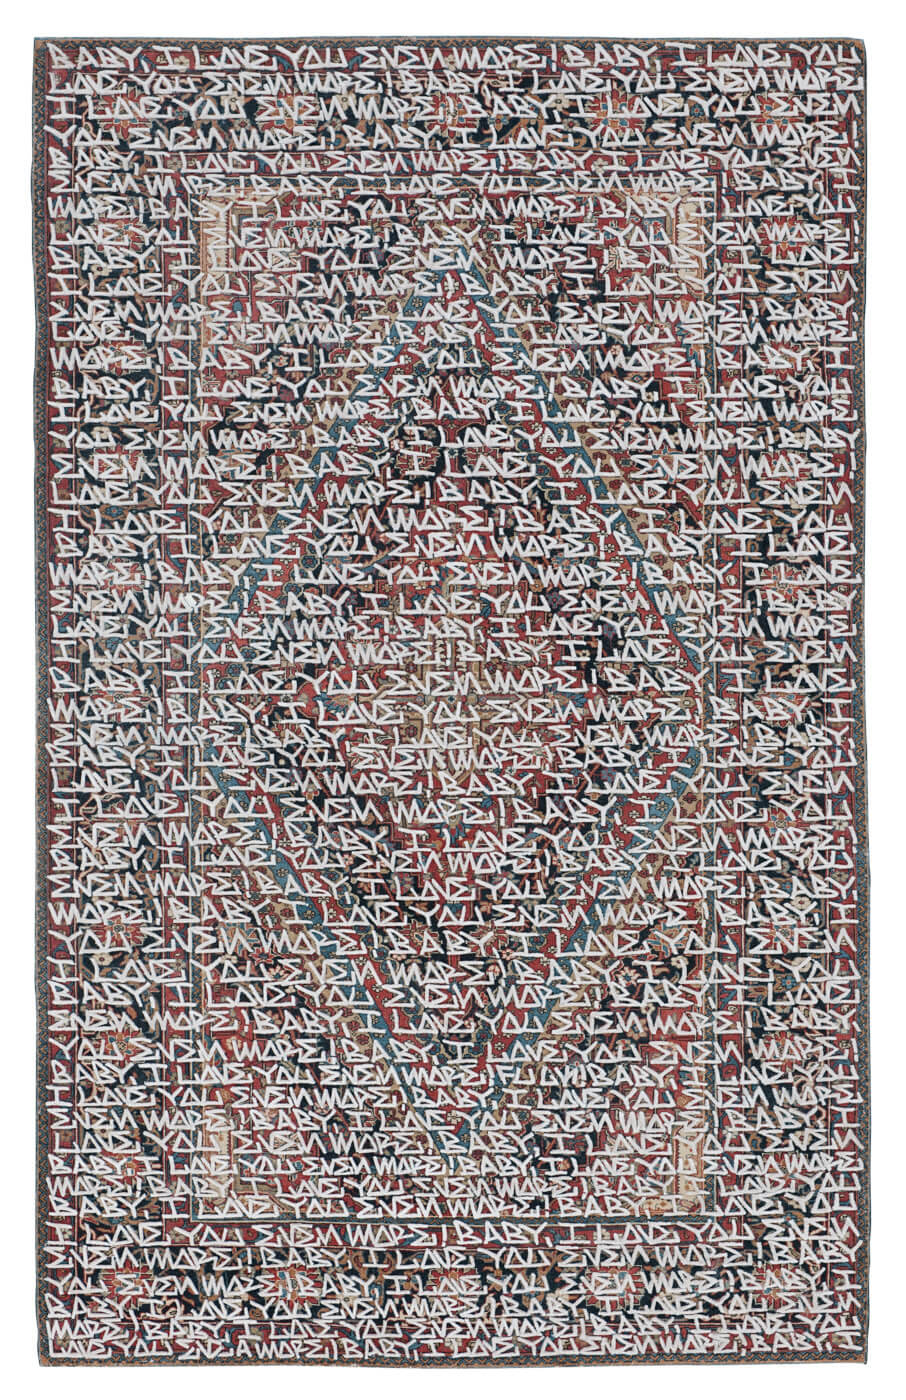 I Love You Hand-Woven Luxury Rug ☞ Size: 200 x 300 cm